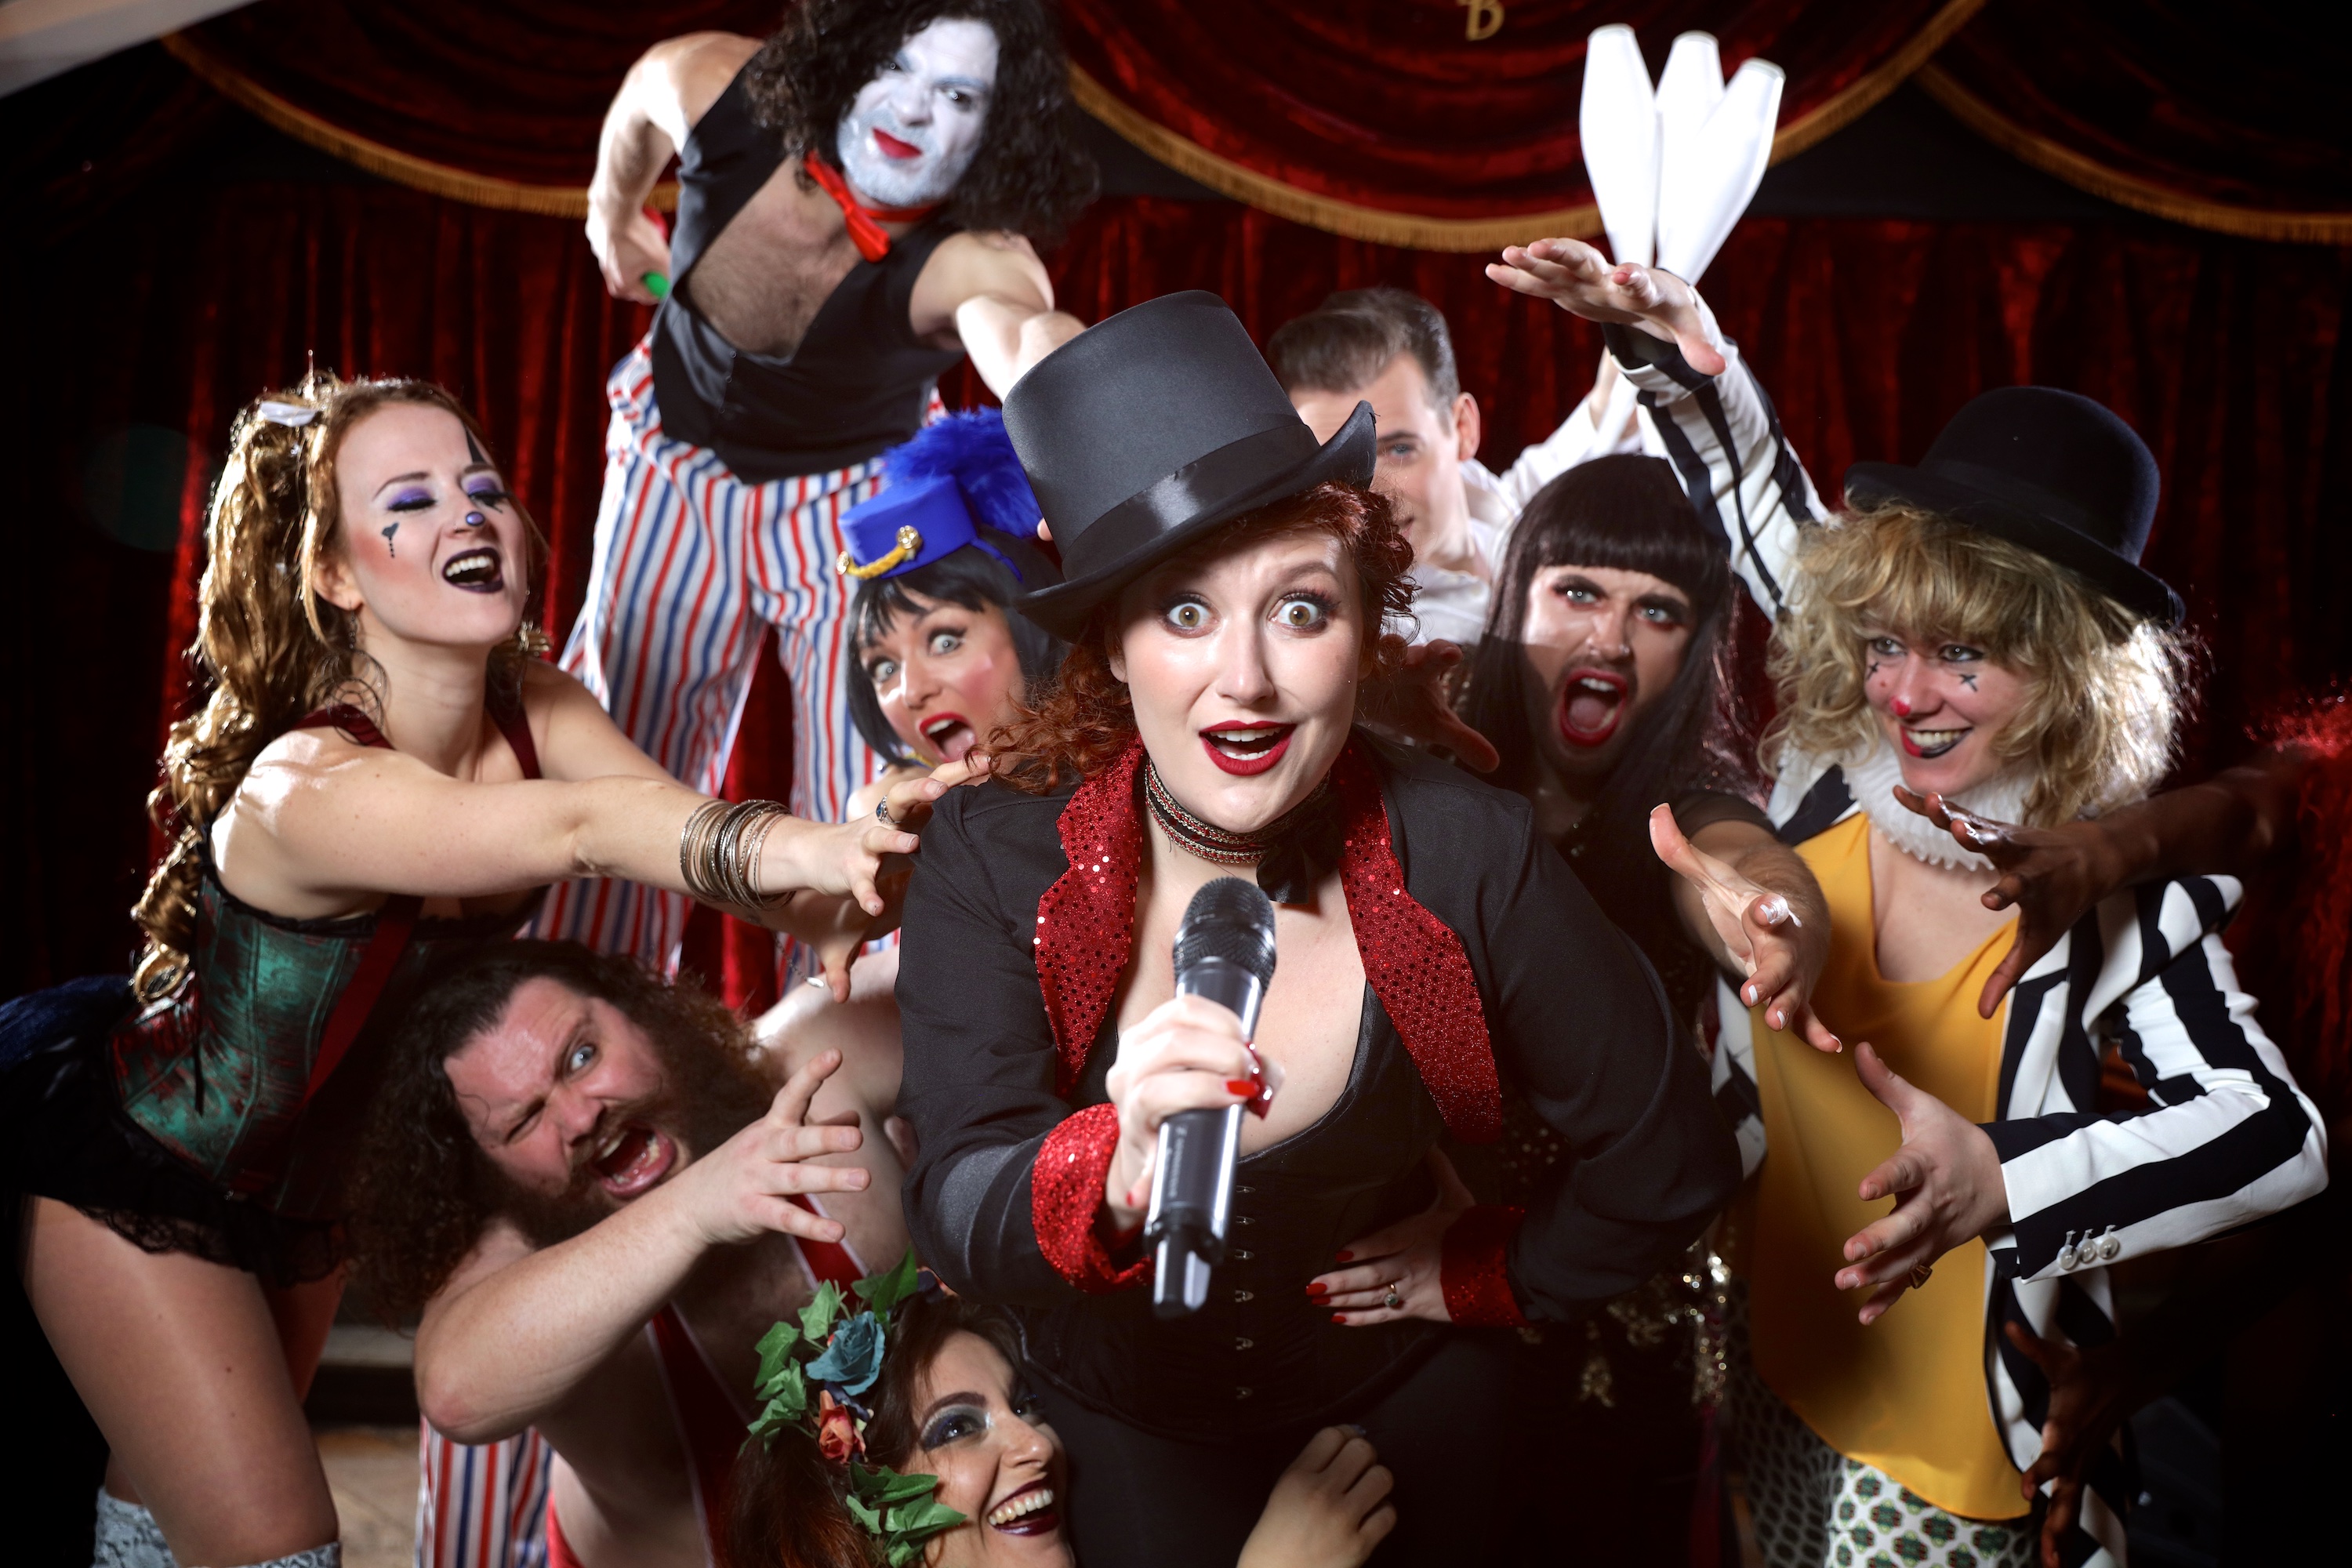 The Craziest List Of Fancy Dress Party Ideas For Adults - Plus top tips to  make your event a special one - FLAVOURMAG